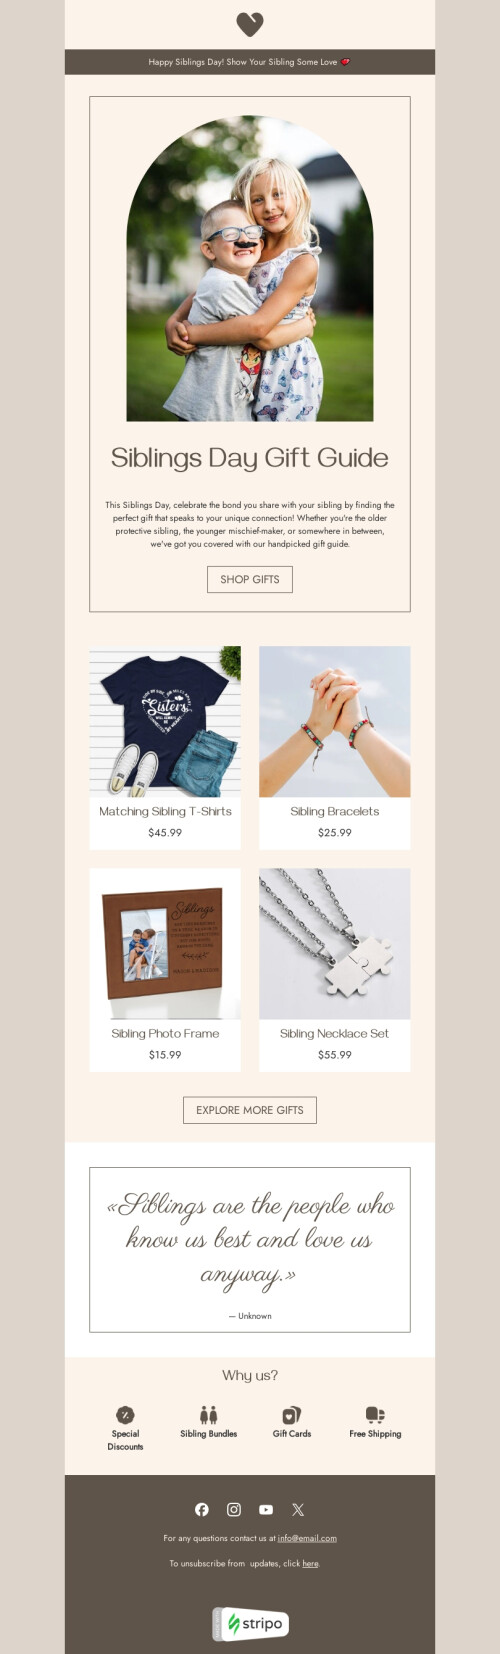 Siblings Day email template "Gift for siblings" for ecommerce industry desktop view